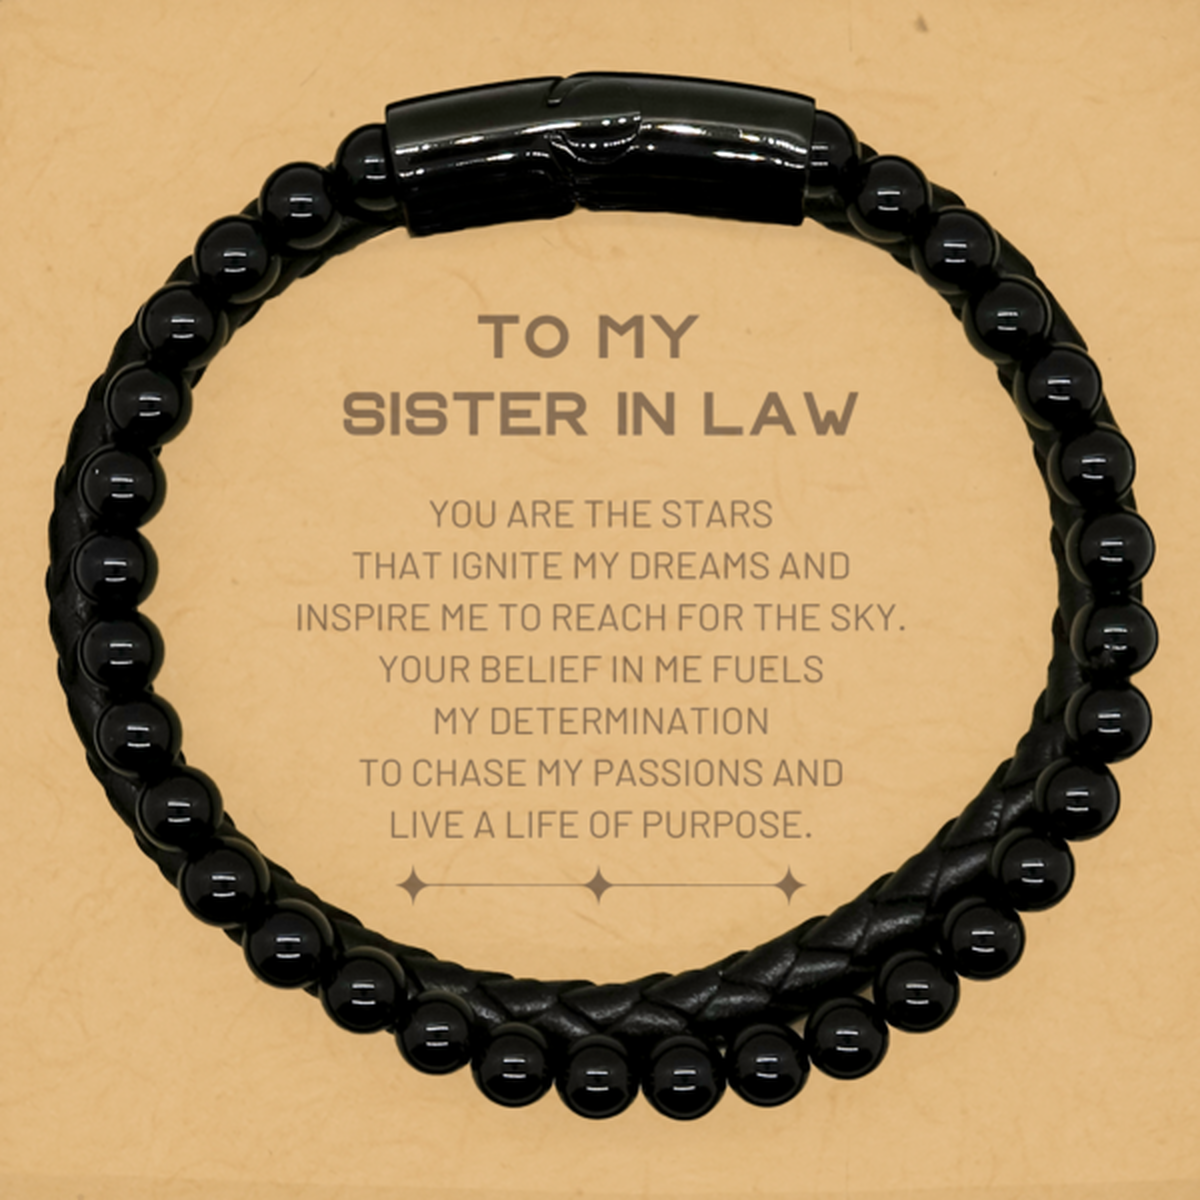 To My Sister In Law Stone Leather Bracelets, You are the stars that ignite my dreams and inspire me to reach for the sky, Birthday Unique Gifts For Sister In Law, Thank You Gifts For Sister In Law